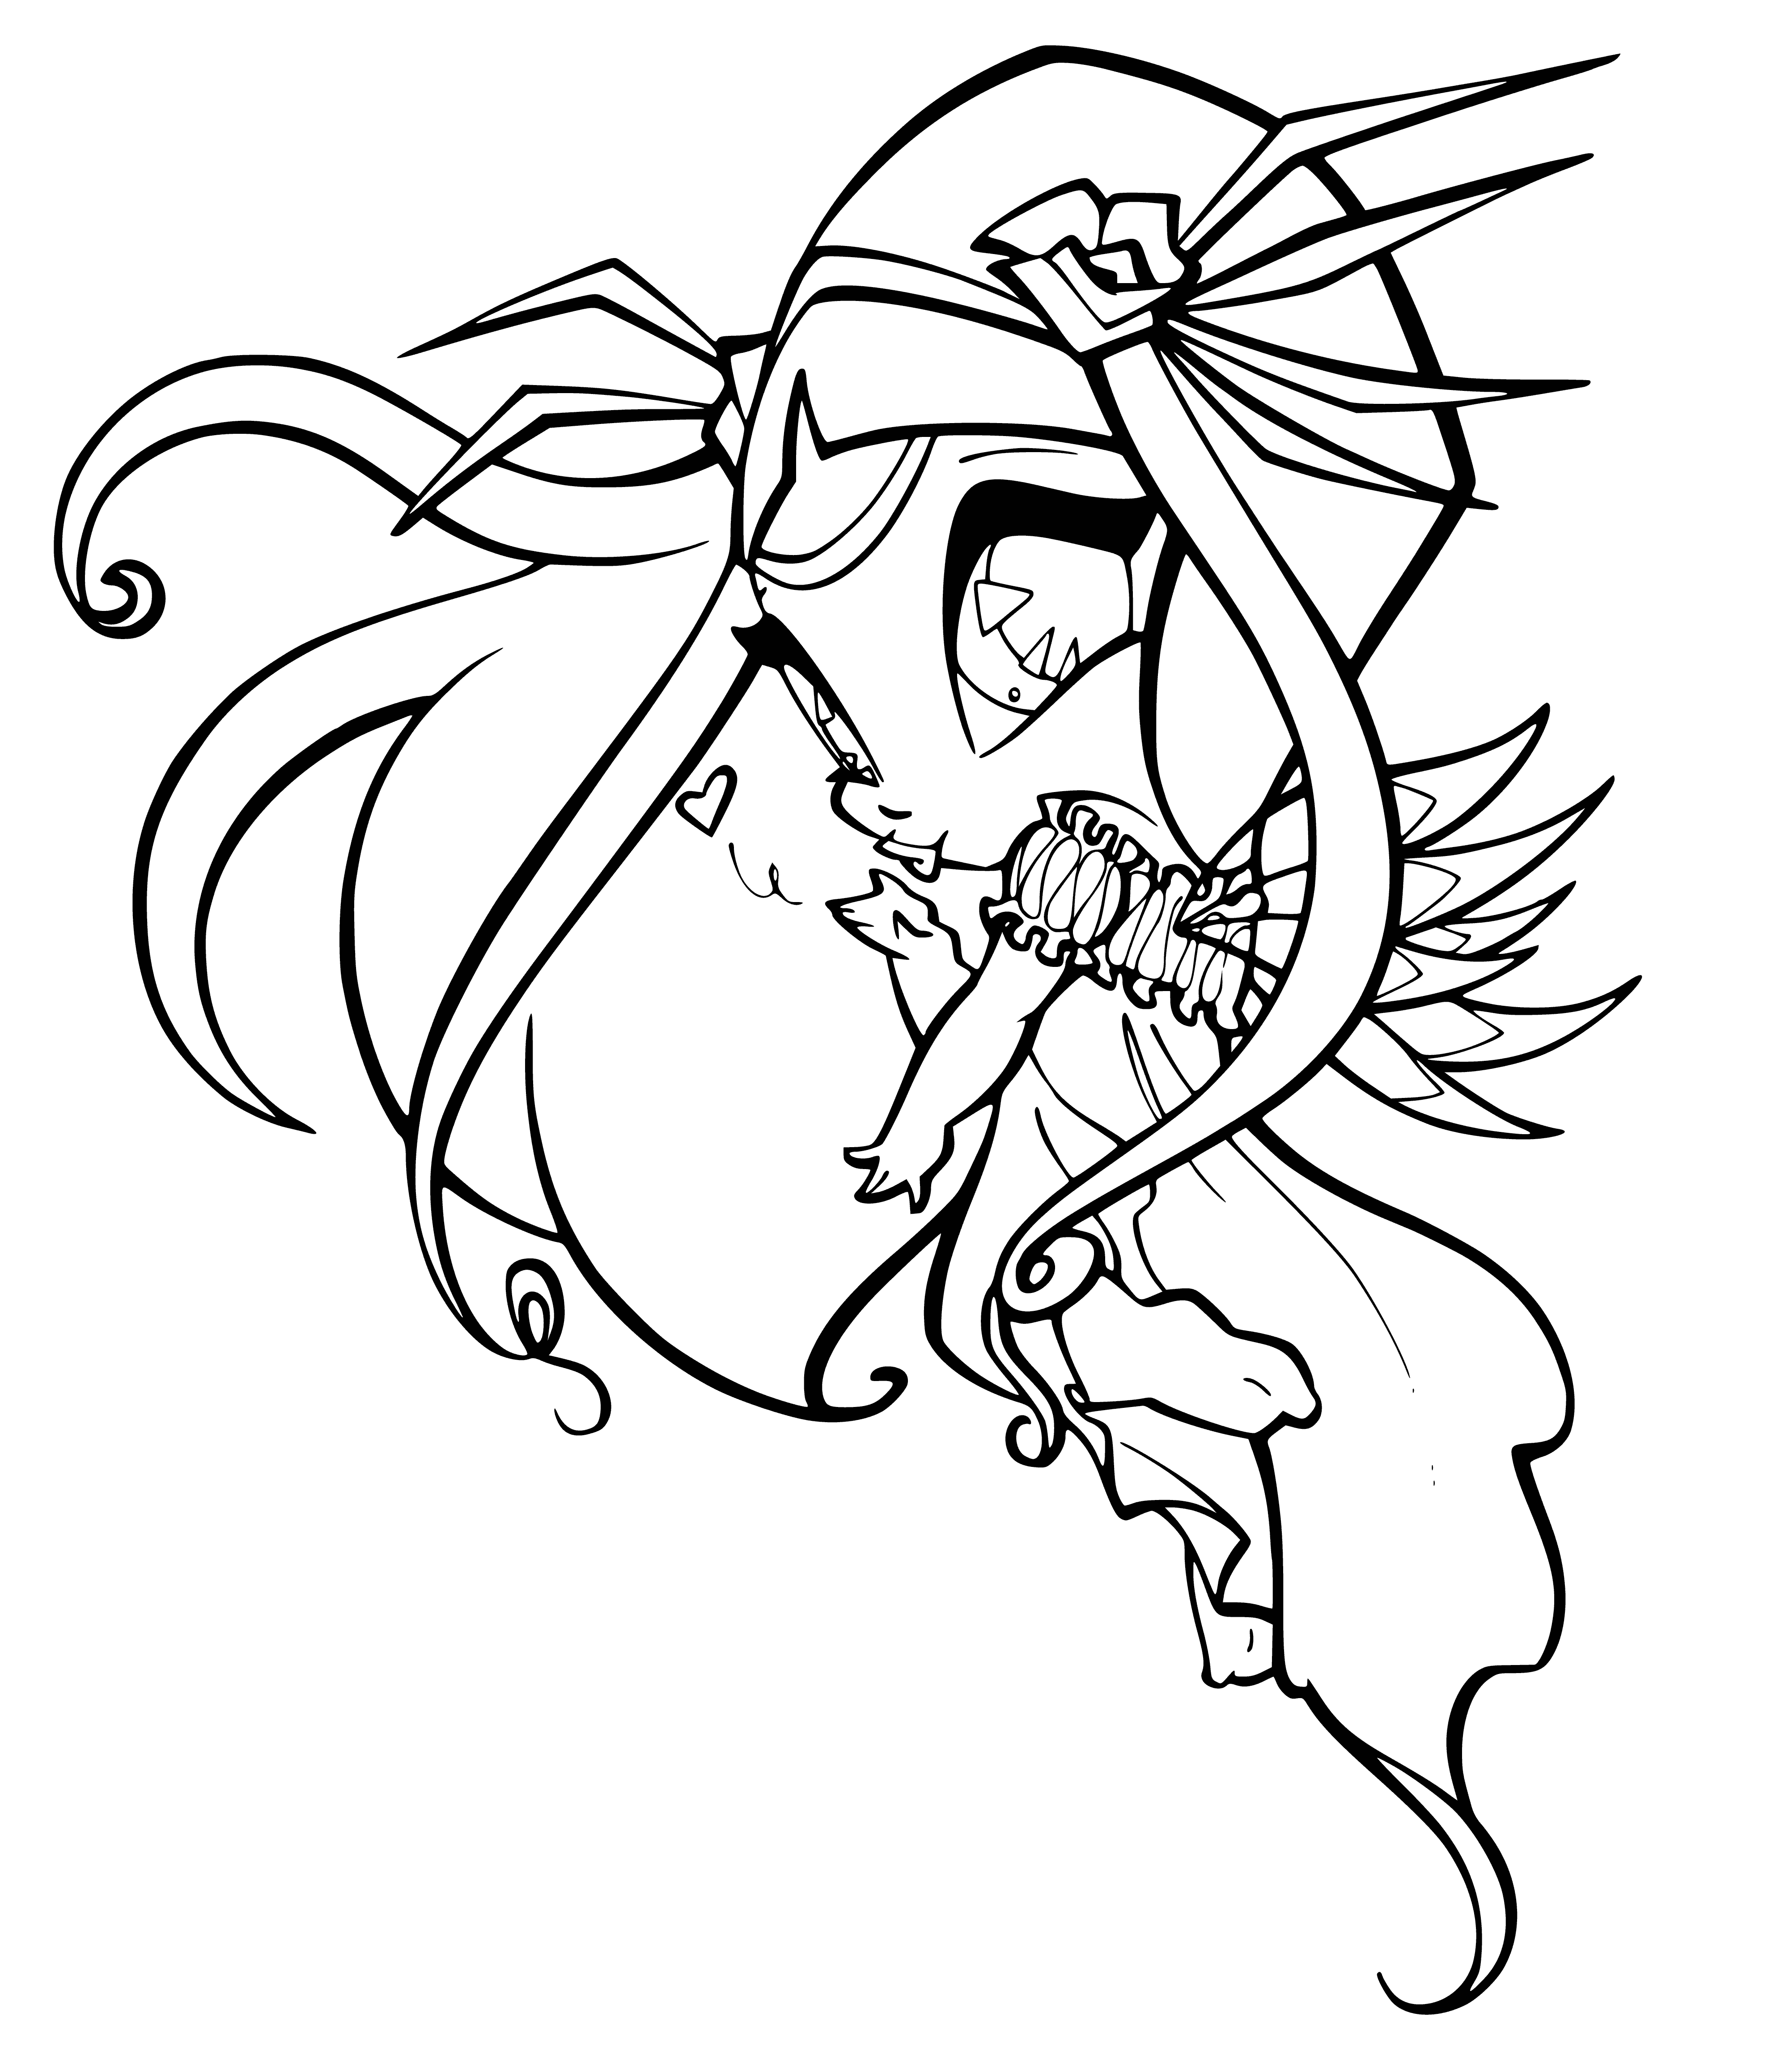 coloring page: Small humanoid w/ delicate features, pale skin & airy pink hair. Has 2 wings, bow & arrow. Has a mischievous look & expression of playful mischief.